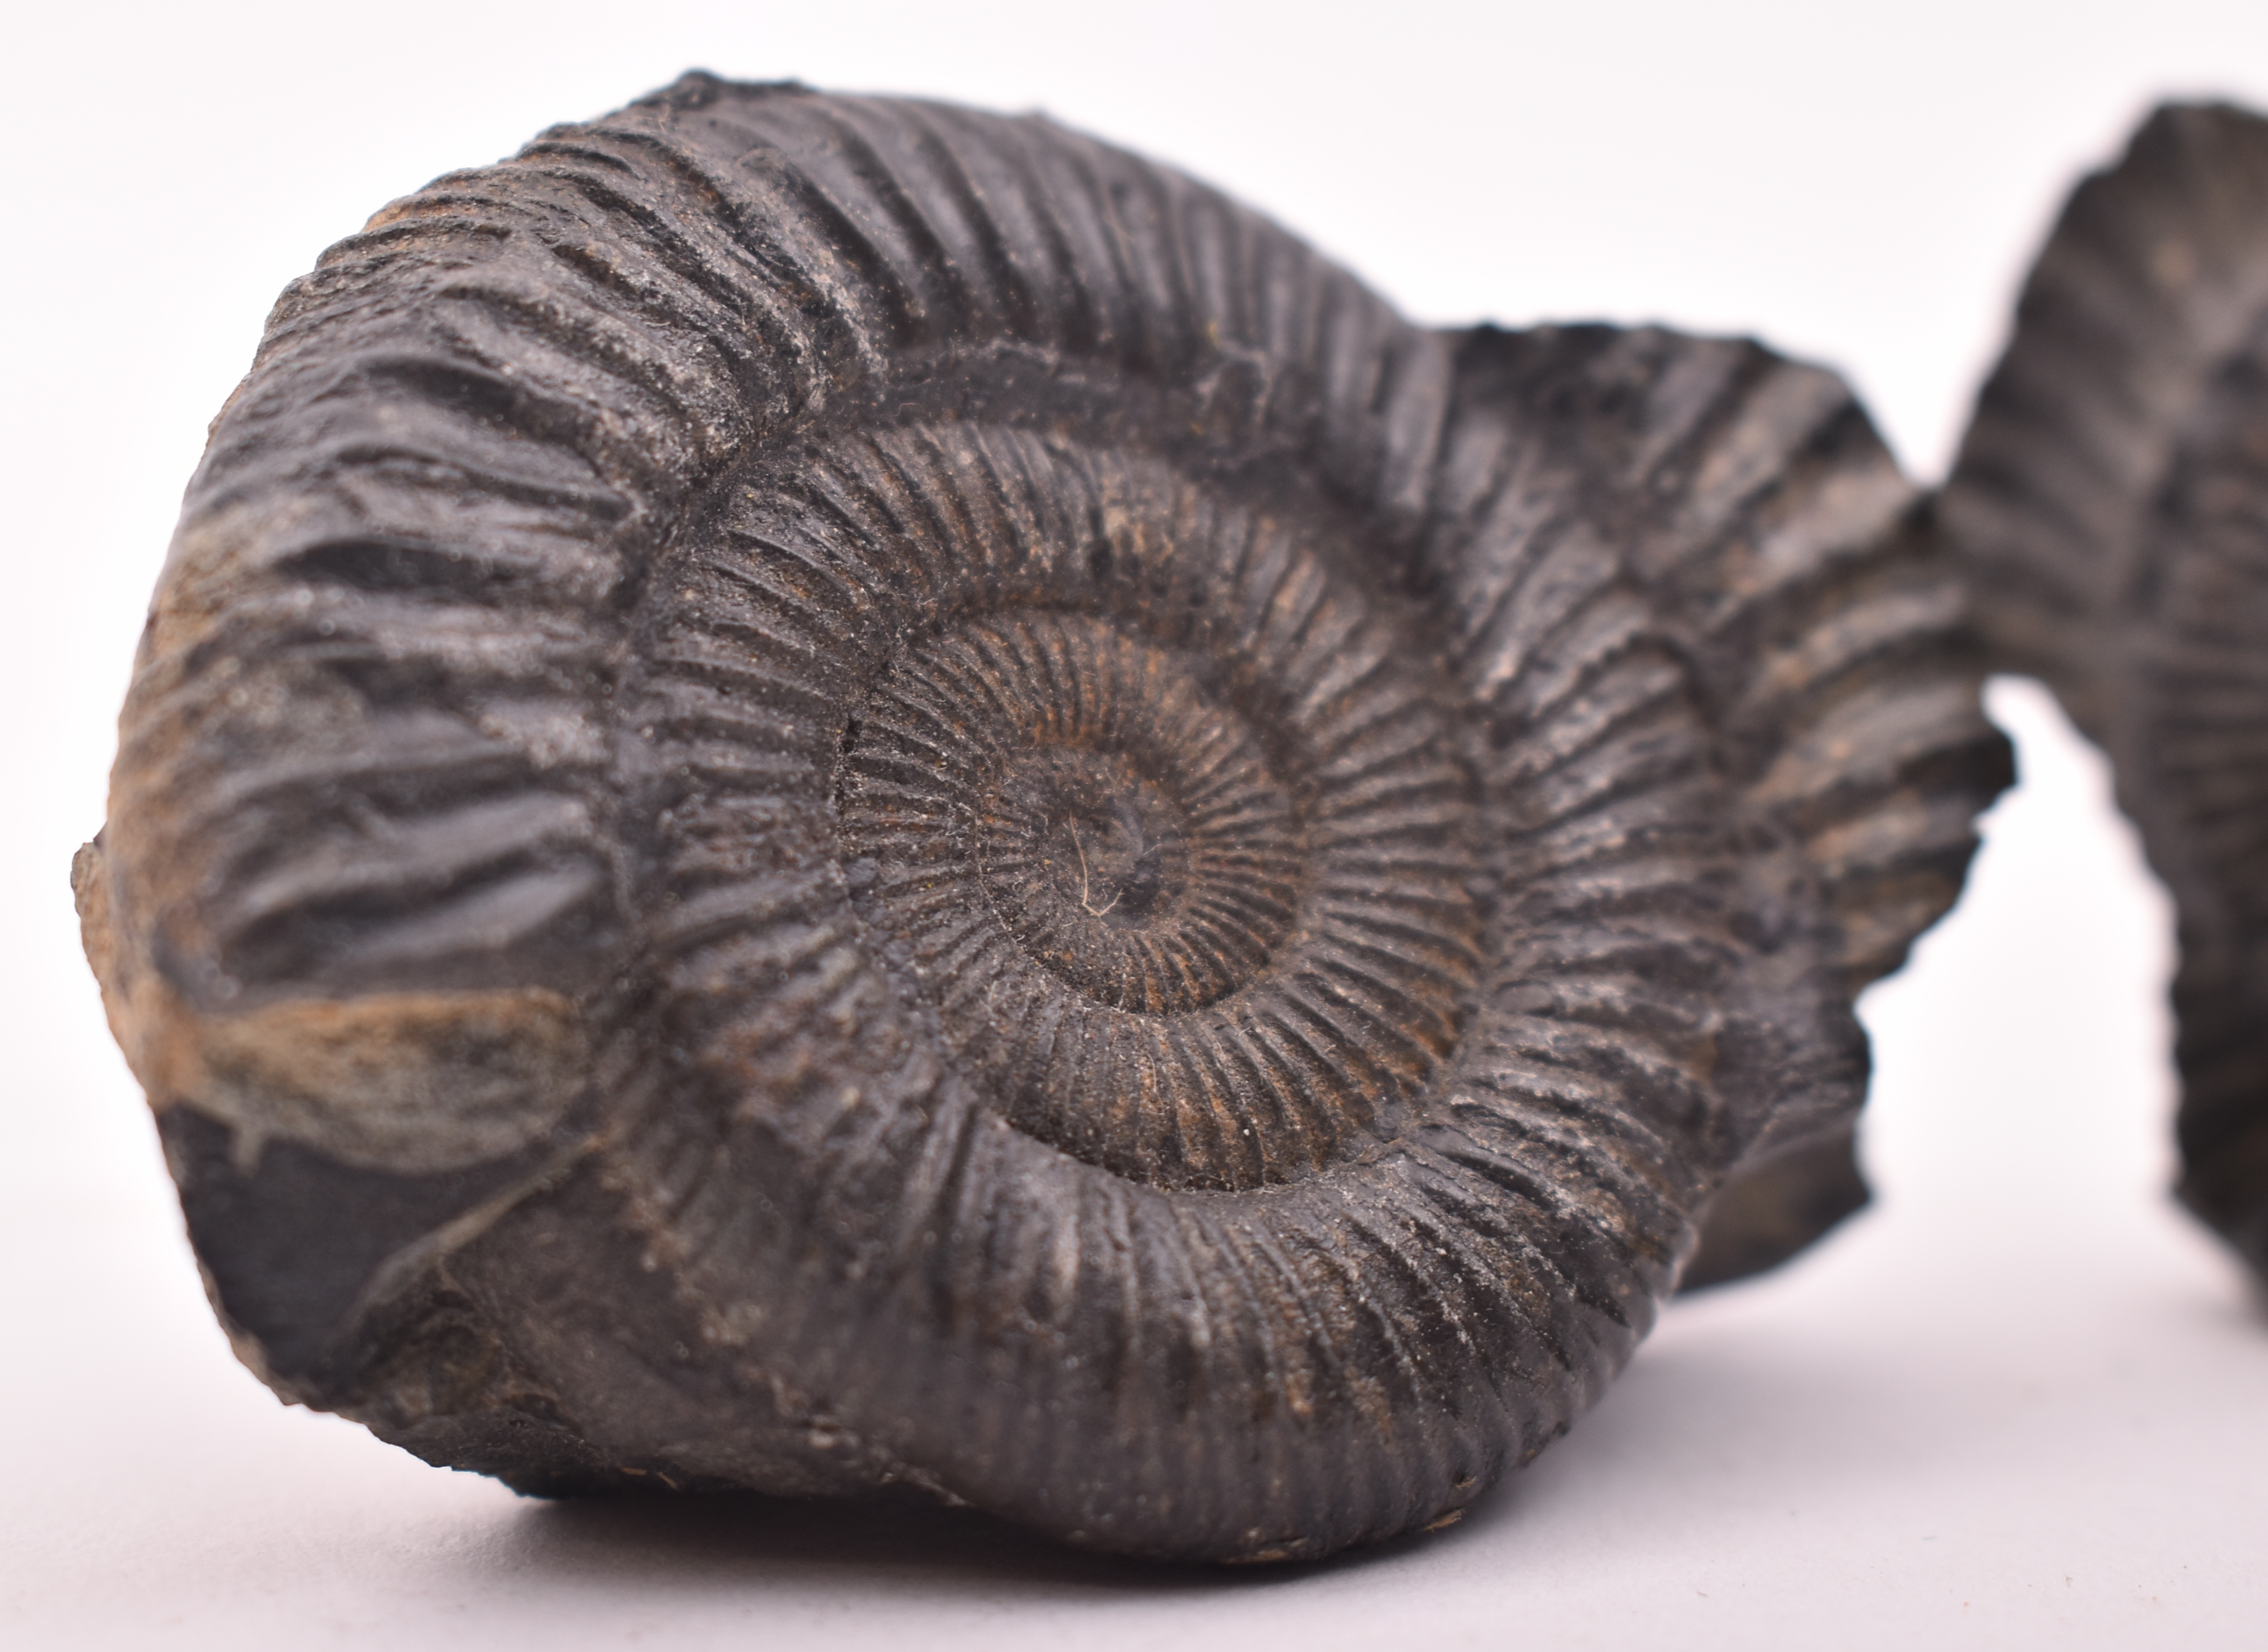 PAIR OF MATCHED PYRITE AMMONITE FOSSILS - Image 3 of 5